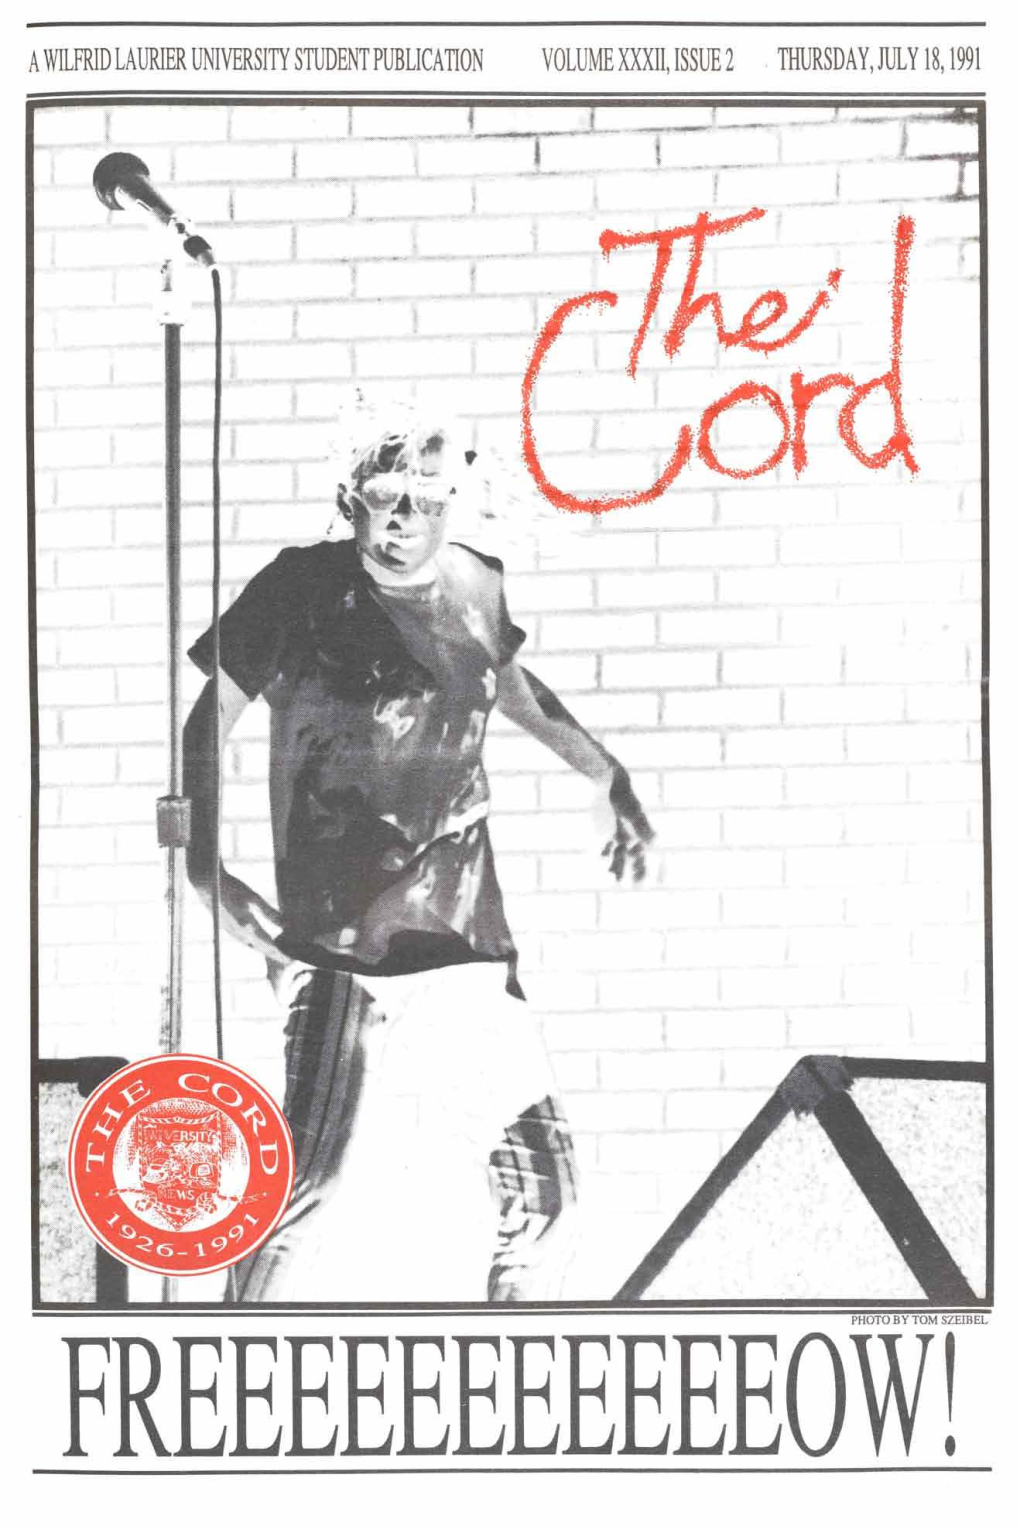 The Cord Weekly (July 18, 1991)